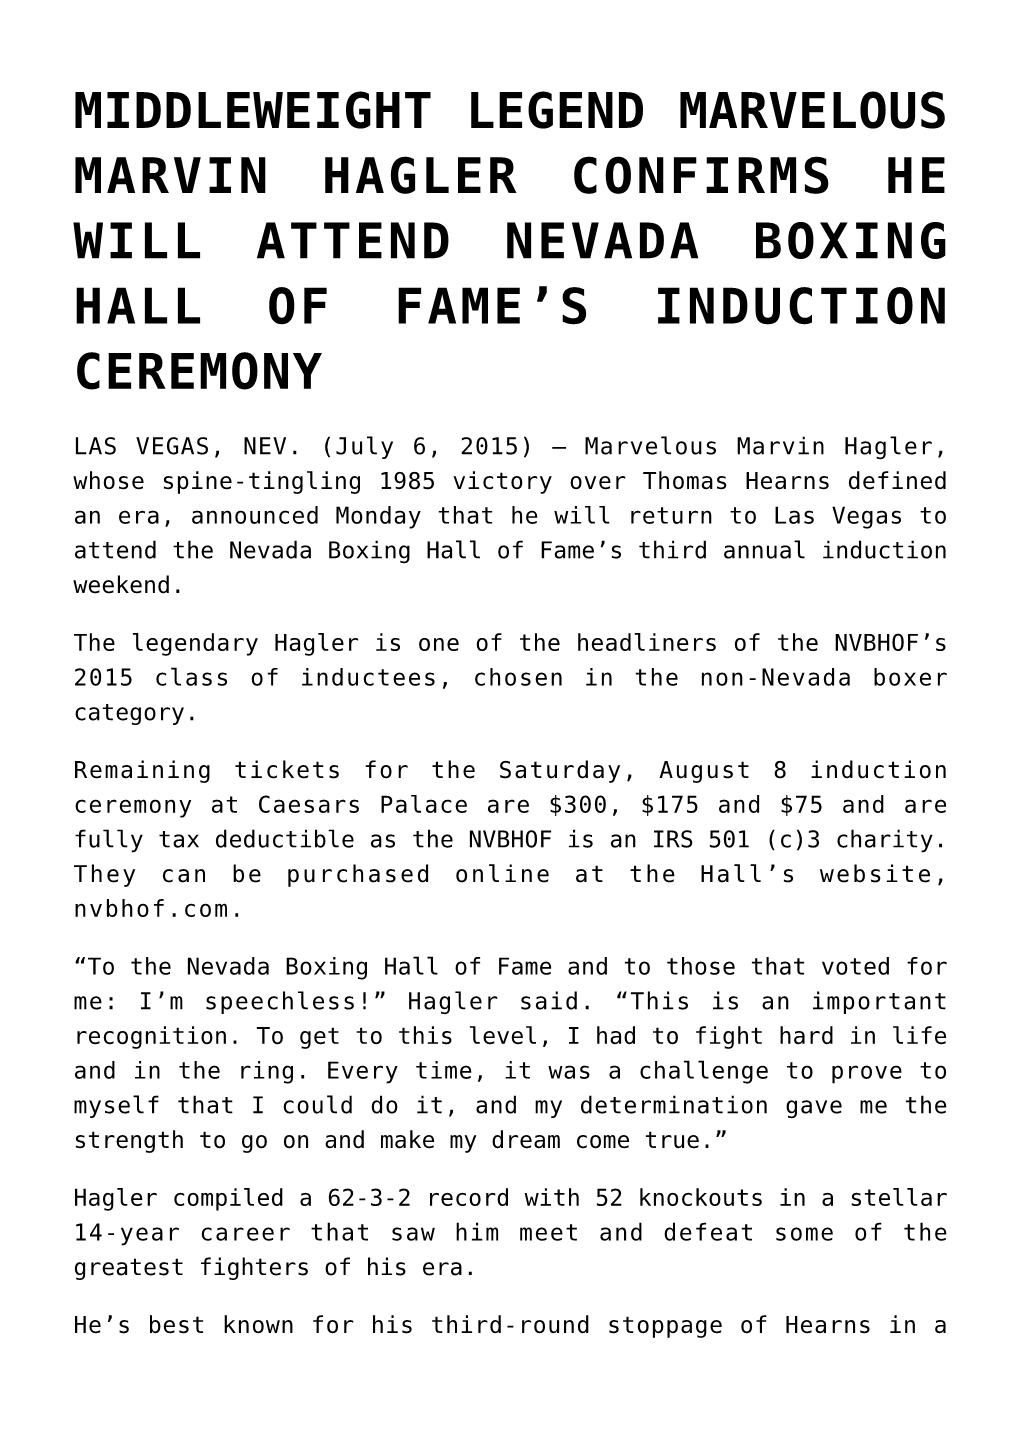 Middleweight Legend Marvelous Marvin Hagler Confirms He Will Attend Nevada Boxing Hall of Fame’S Induction Ceremony